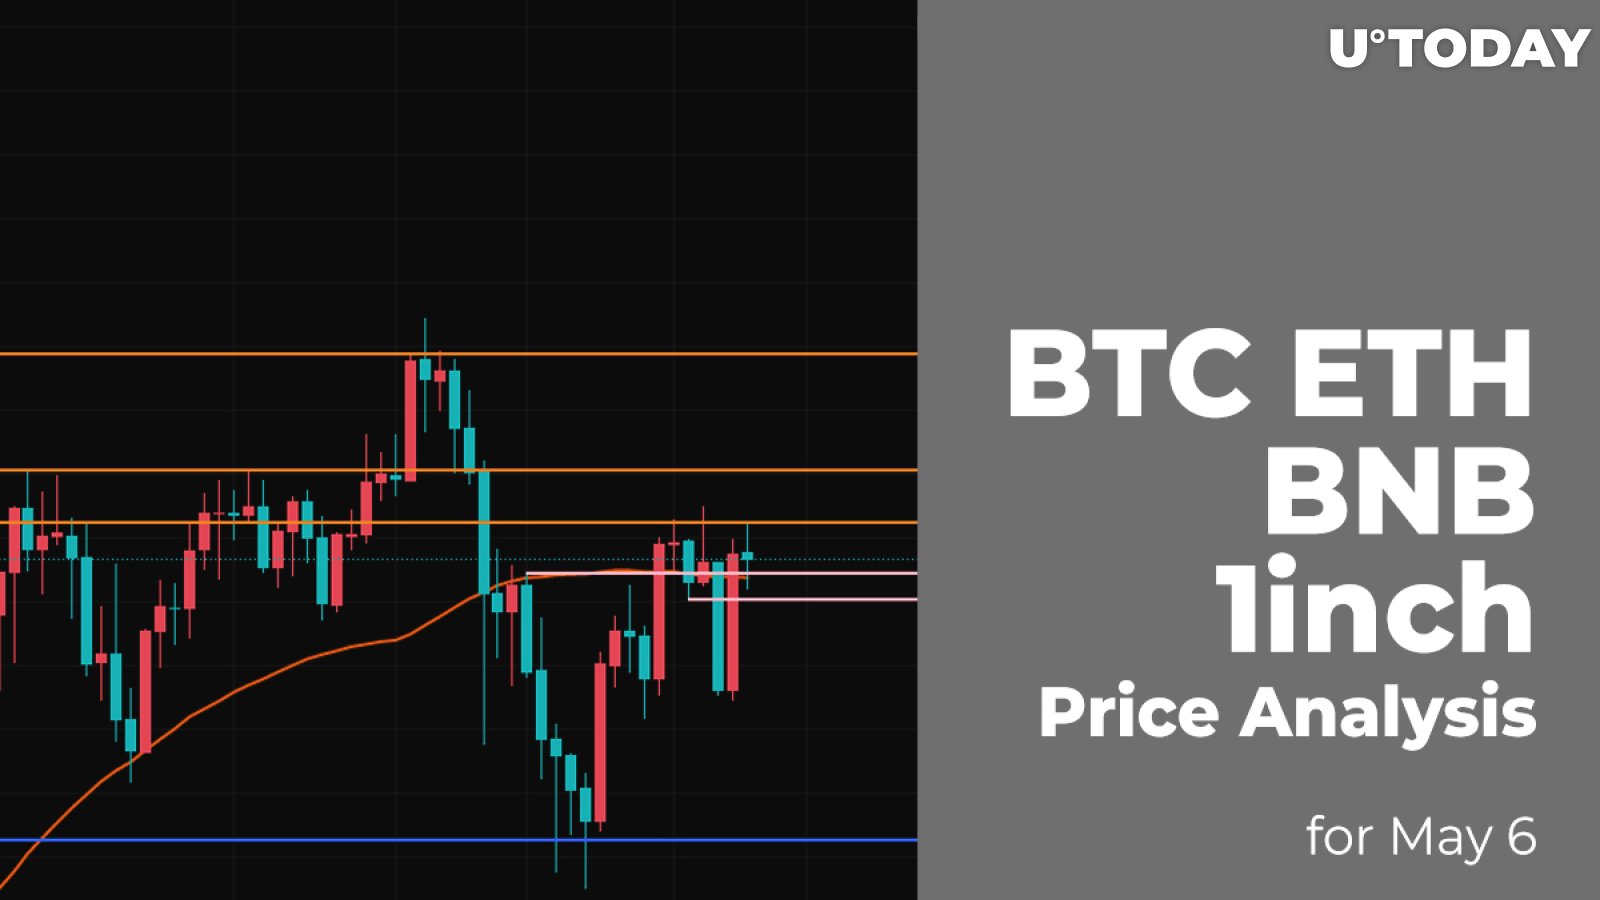 BTC, ETH, BNB and 1inch Price Analysis for May 6